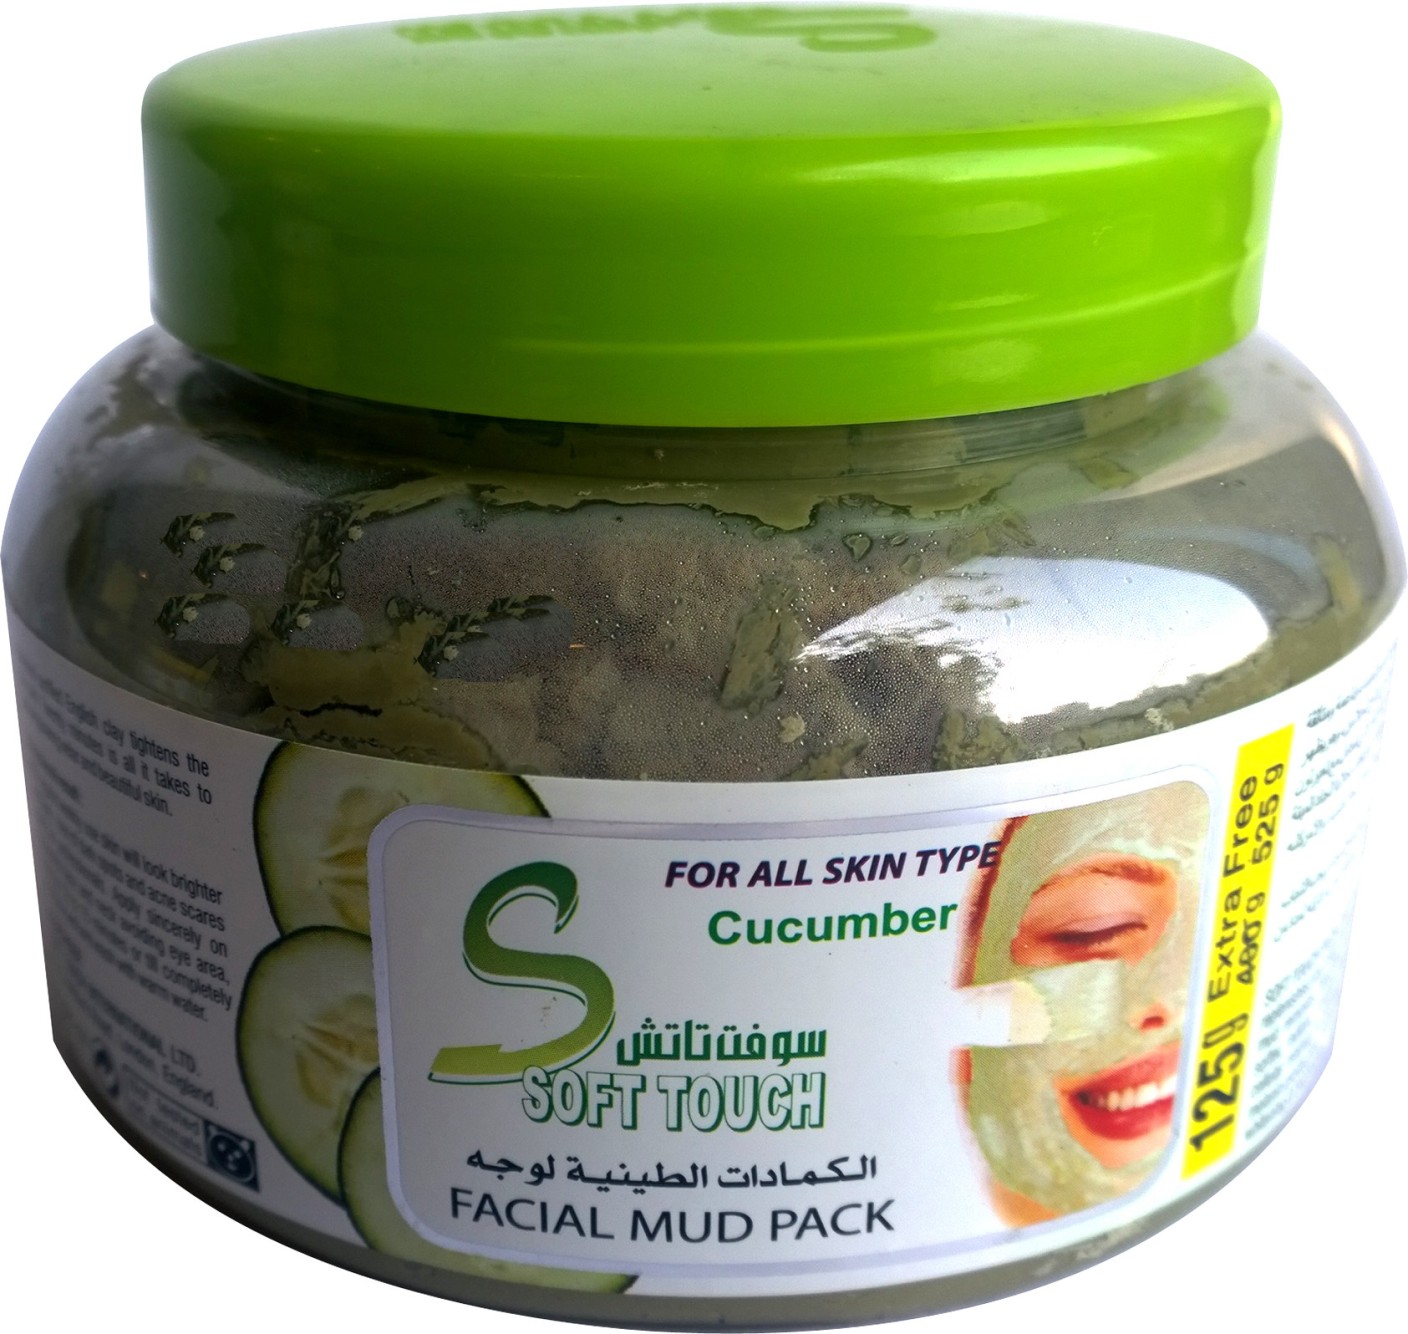 Softtouch Cucumber Facial Mud Pack - Price in India, Buy 